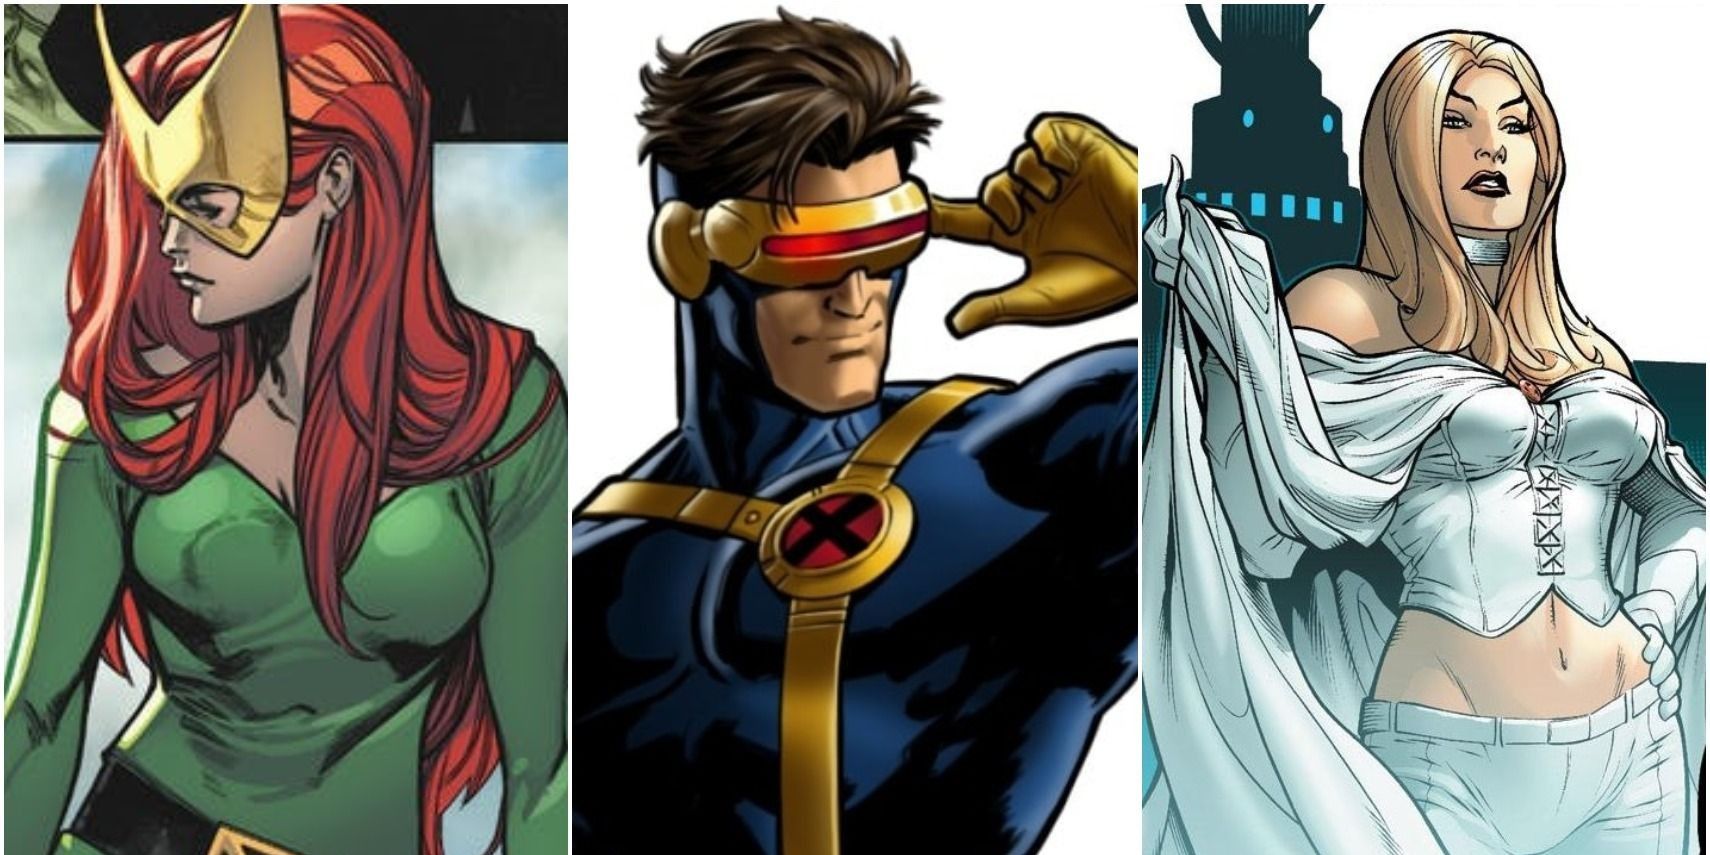 Jean Grey, Cyclops, and Emma Frost